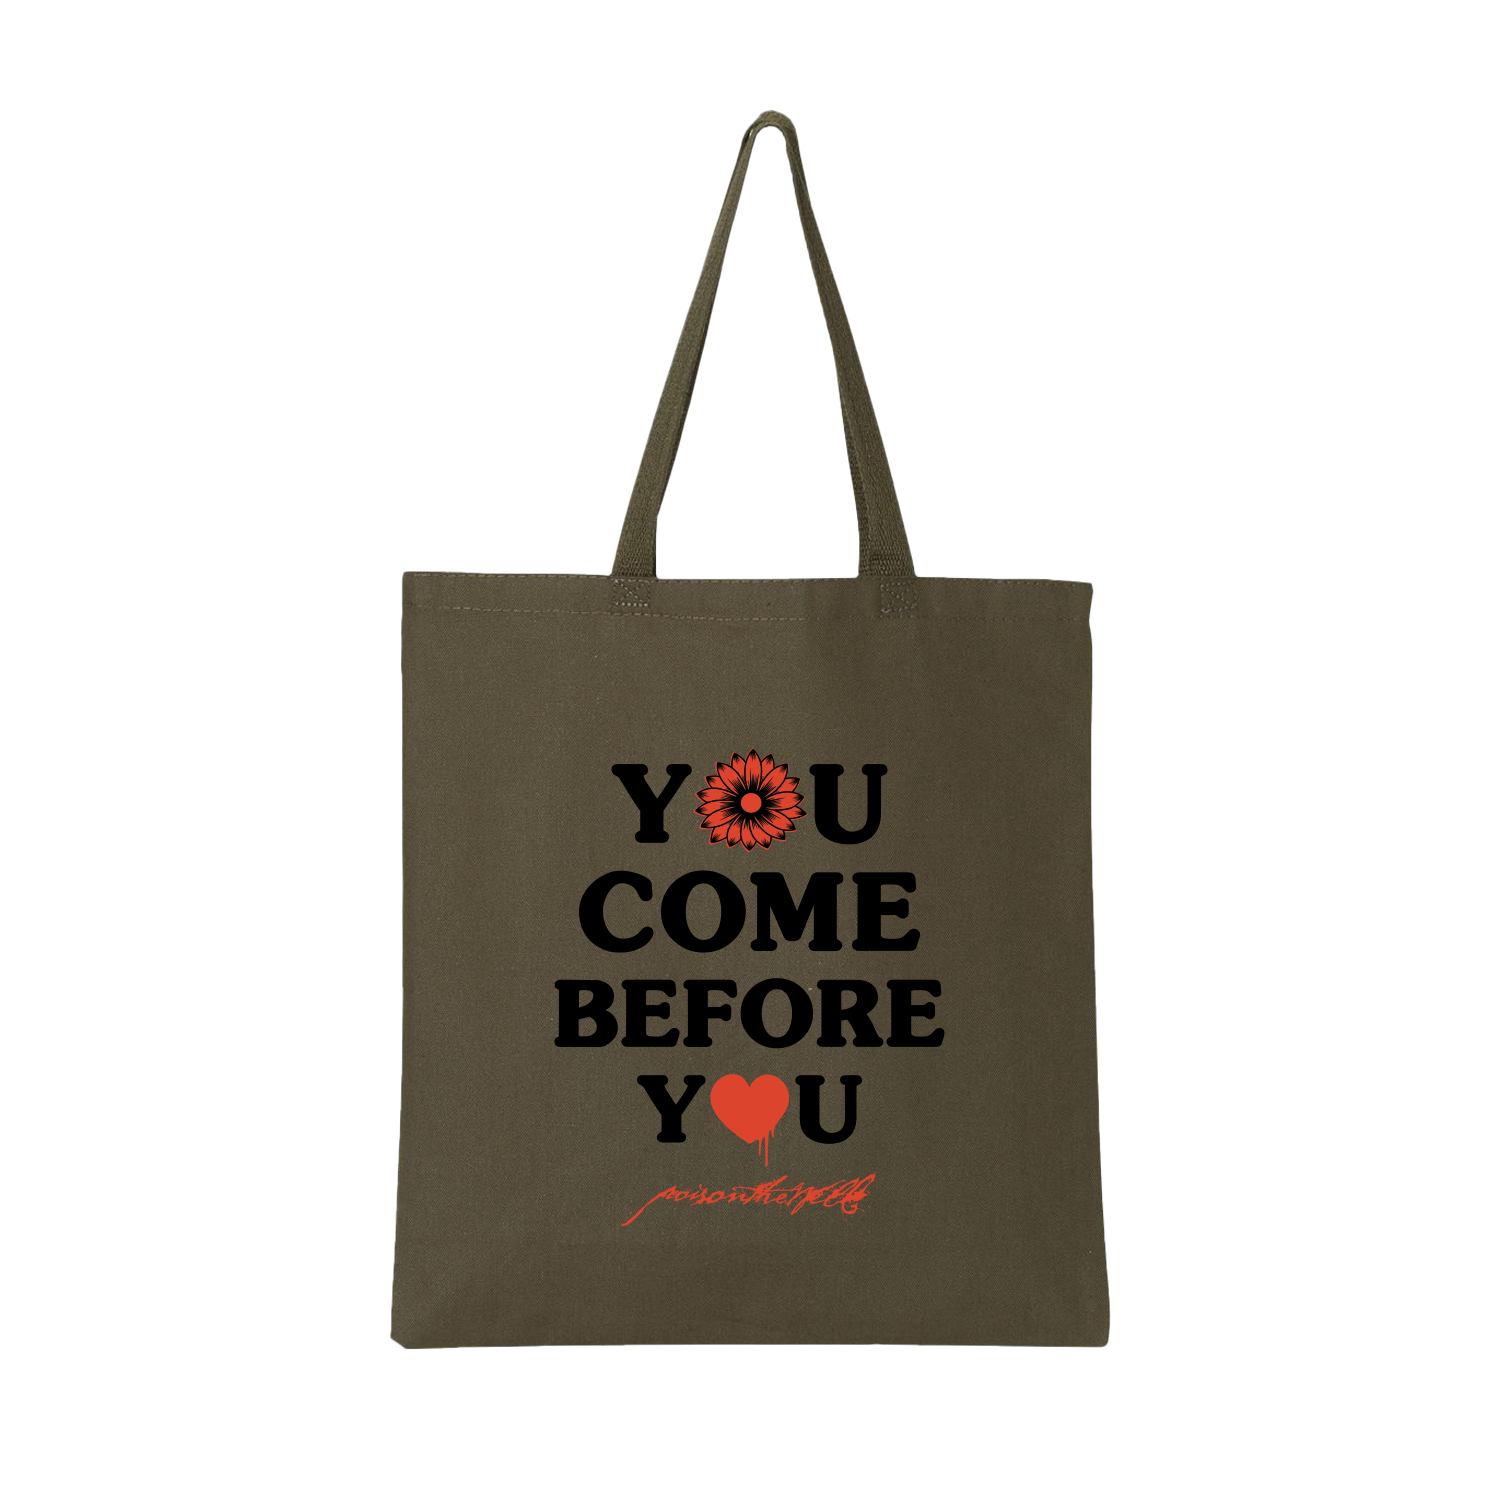 YCBY Tote